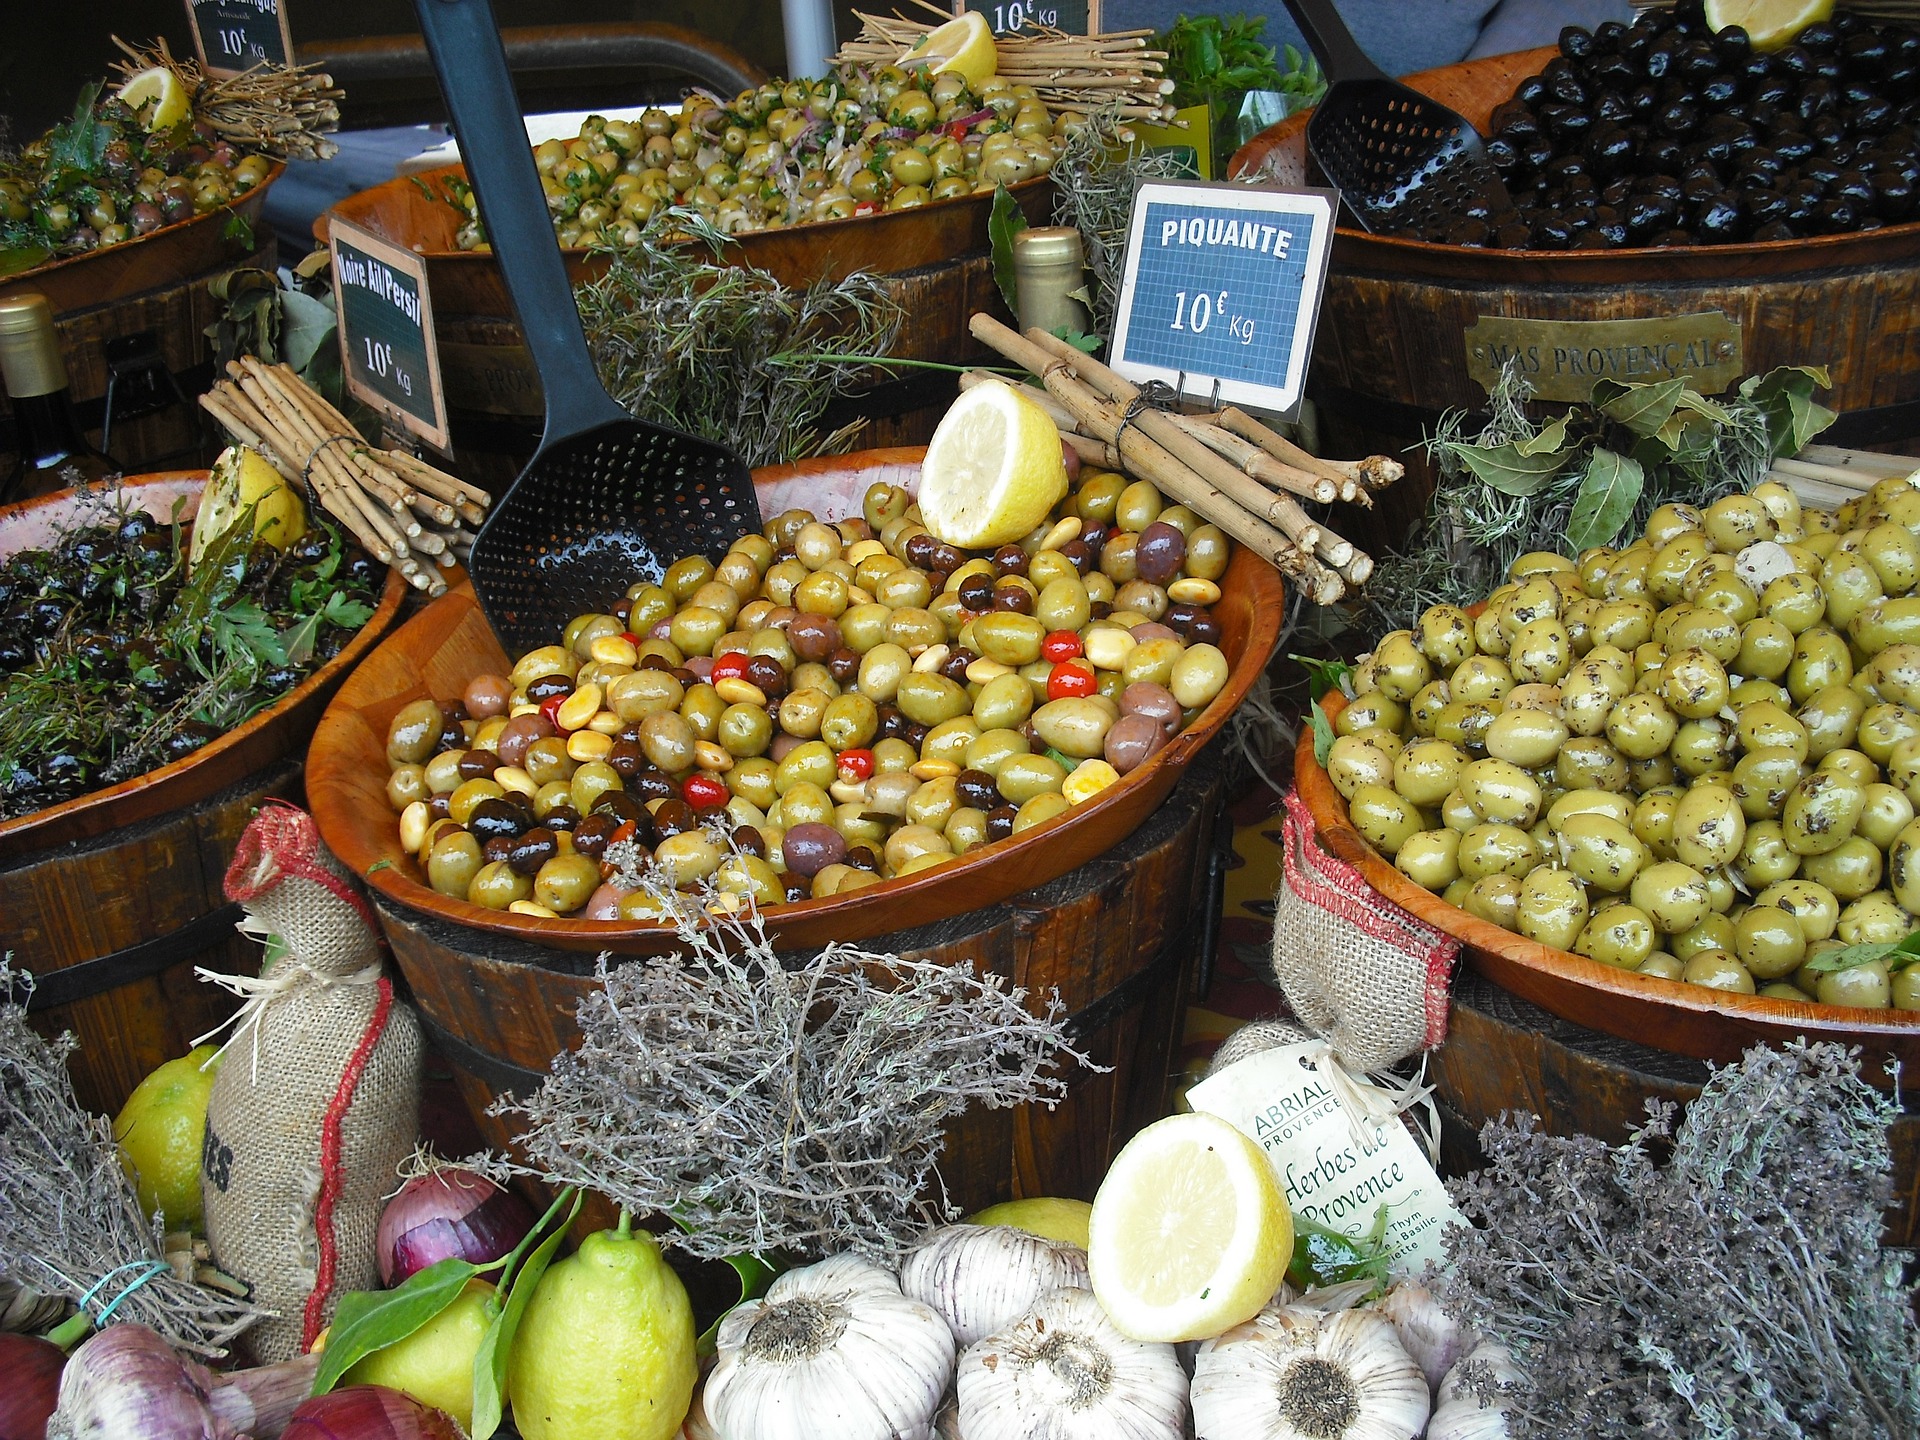  The markets of Provence